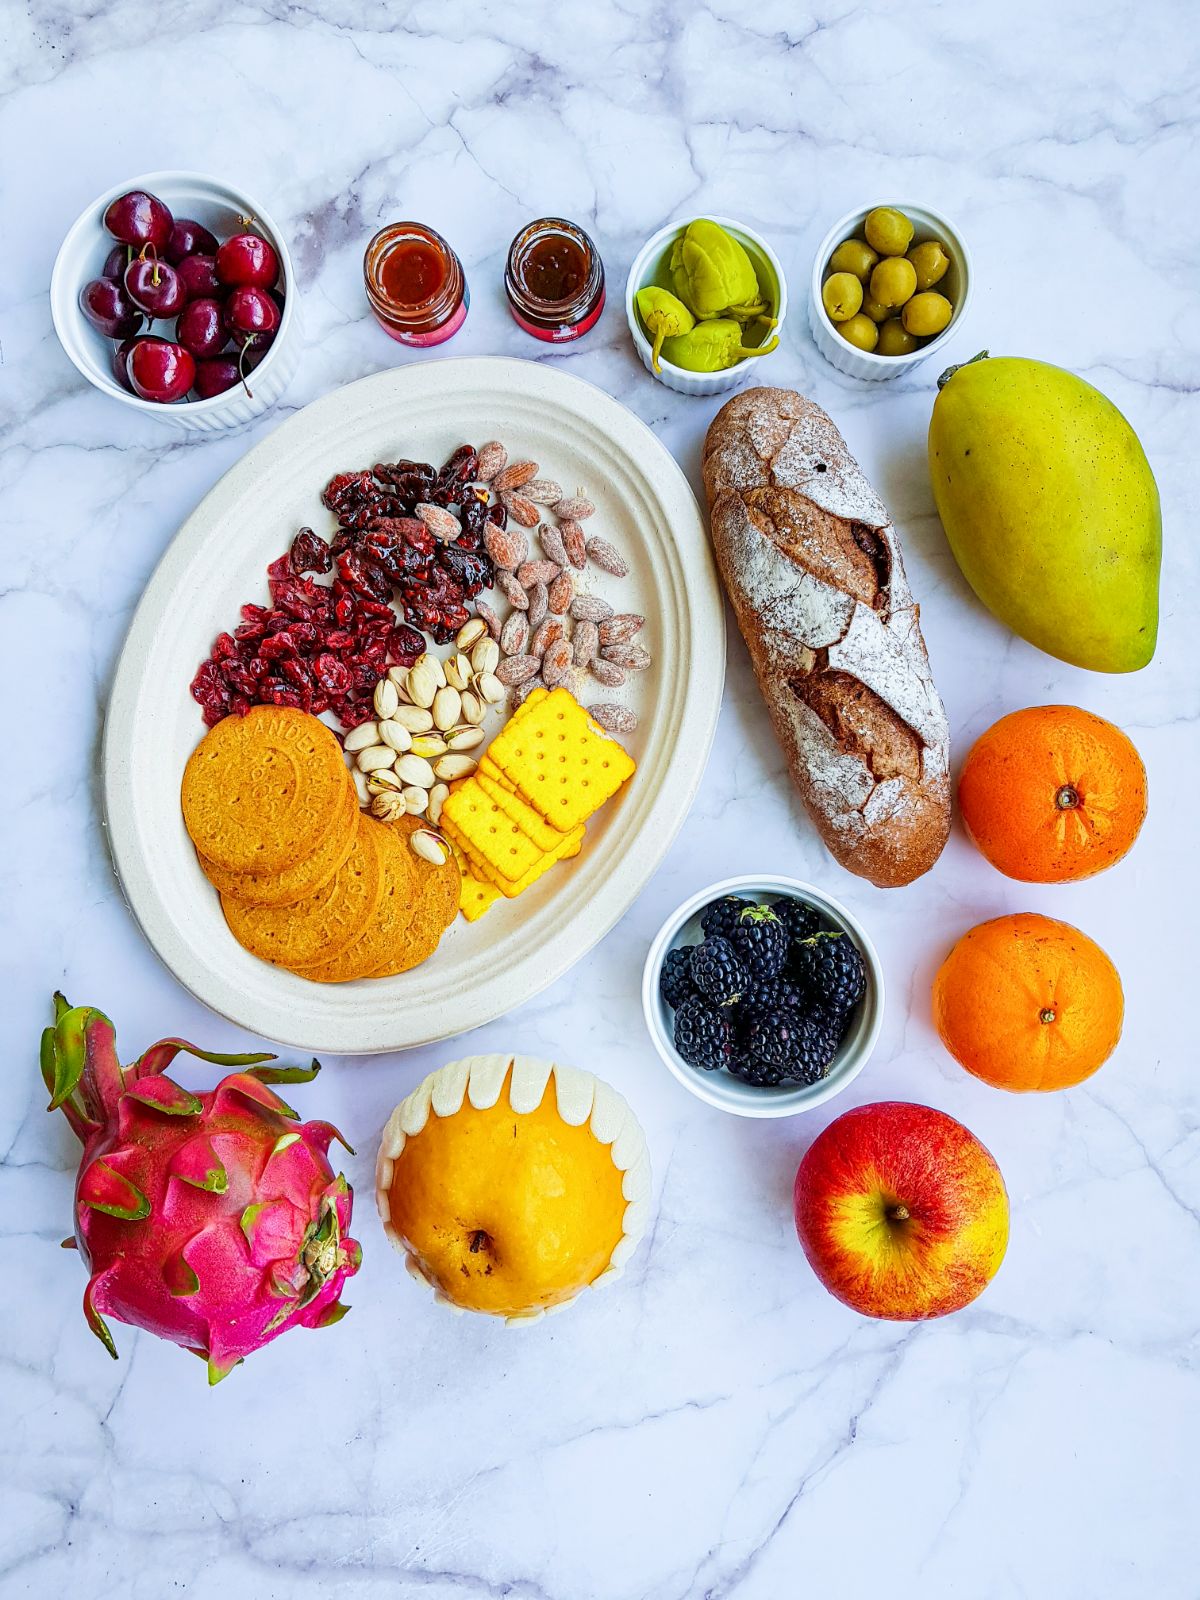 Fresh fruits, Nuts, Dried fruits, and Pickles for Simple Charcuterie Board.